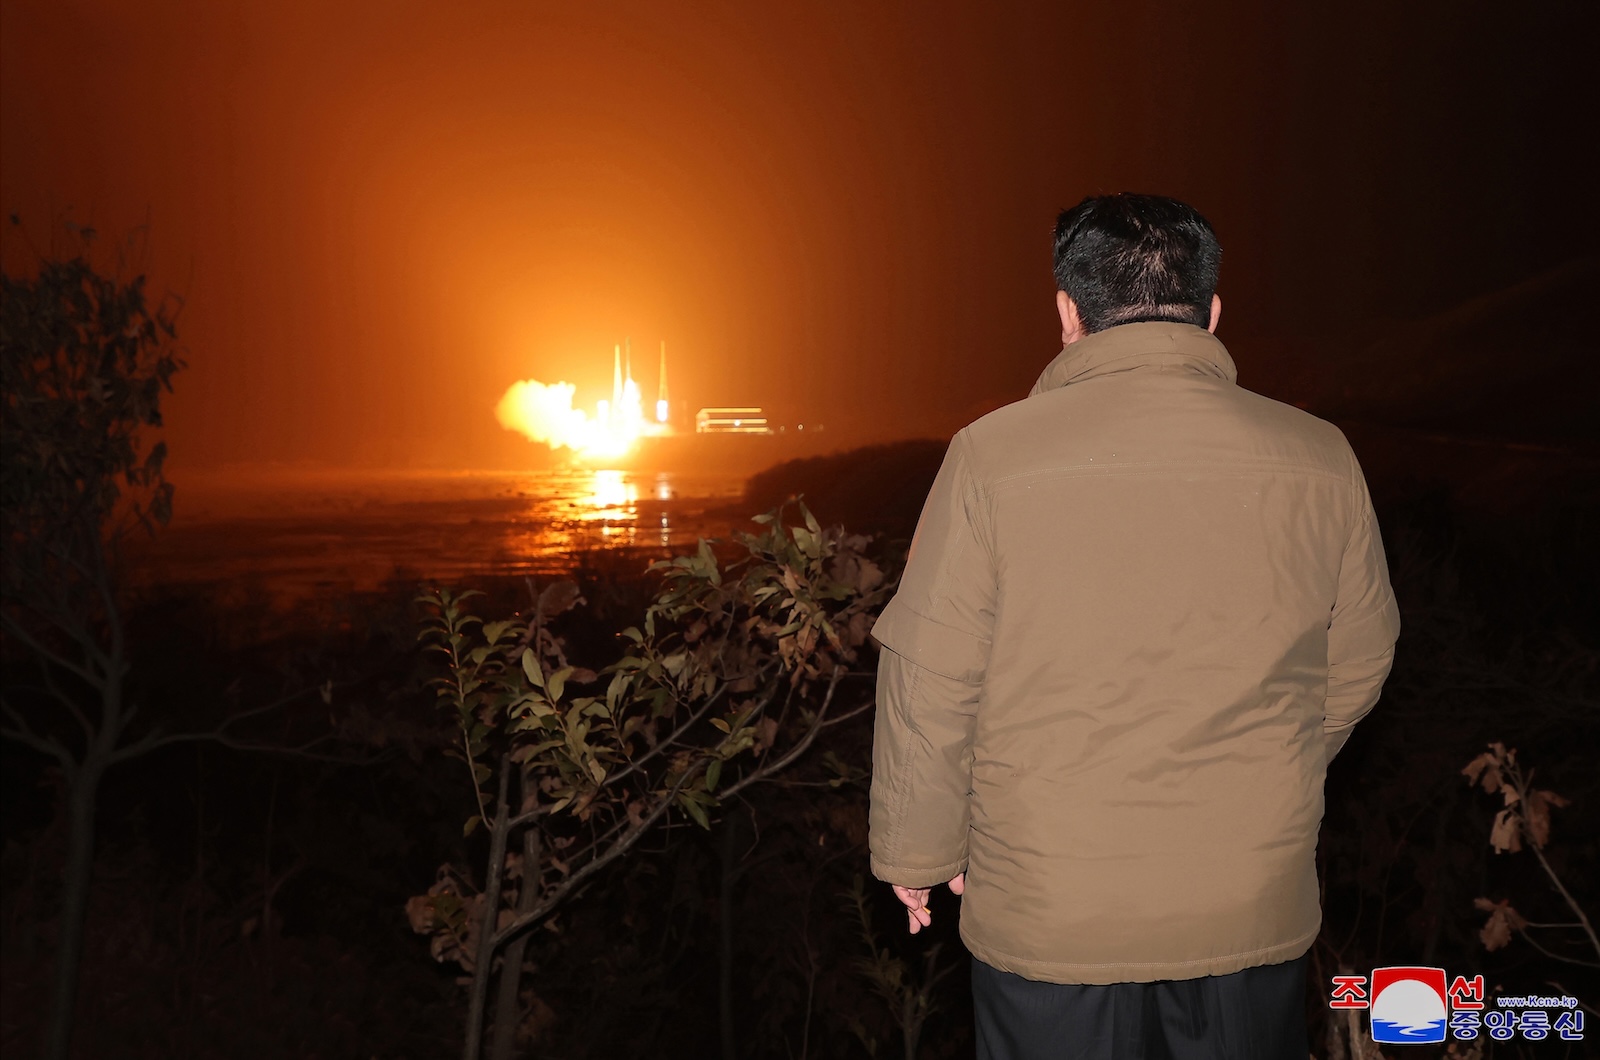 epa10988693 A photo released by the official North Korean Central News Agency (KCNA) on 22 November 2023 shows North Korean leader Kim Jong Un overseeing the launch of a new-type carrier rocket 'Chollima-1' carrying the reconnaissance satellite 'Malligyong-1' at the Sohae Satellite Launching Ground in Cholsan County, North Phyongan Province, North Korea, 21 November 2023. According to KCNA, North Korea's National Aerospace Technology Administration (NATA) has successfully launched the carrier rocket 'Chollima-1' and 'accurately put the reconnaissance satellite 'Malligyong-1' on its orbit at 22:54:13, 705s after the launch'.  EPA/KCNA   EDITORIAL USE ONLY  EDITORIAL USE ONLY